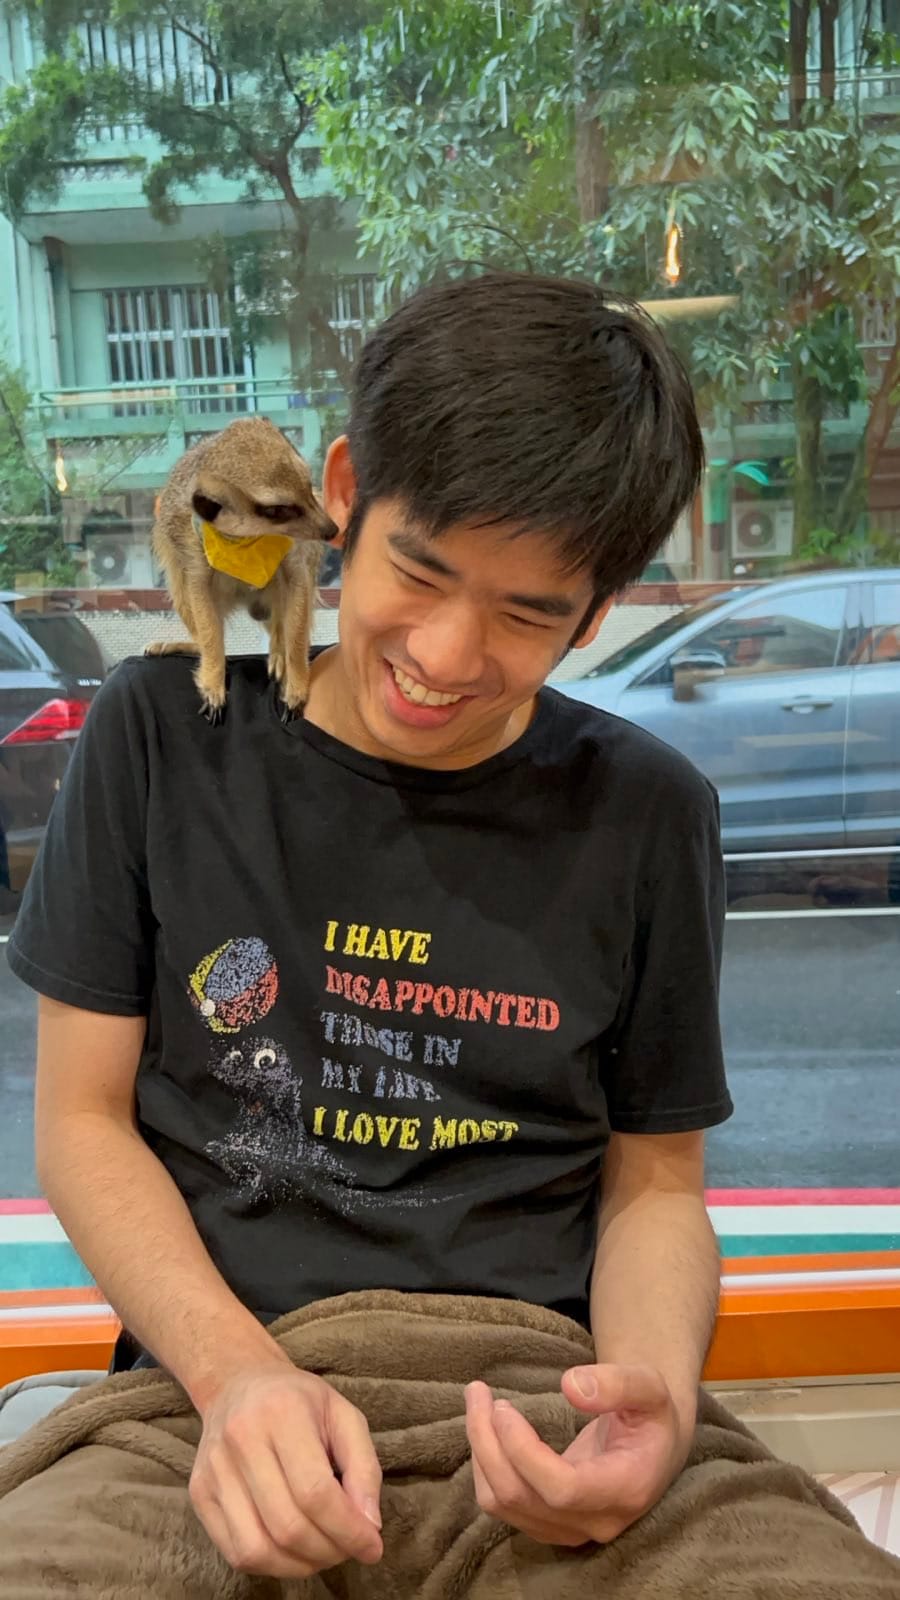 The author visits a meerkat cafe in Taipei and is pictured, laughing, with a meerkat on his shoulder; the meerkat seems to be investigating the author's ear